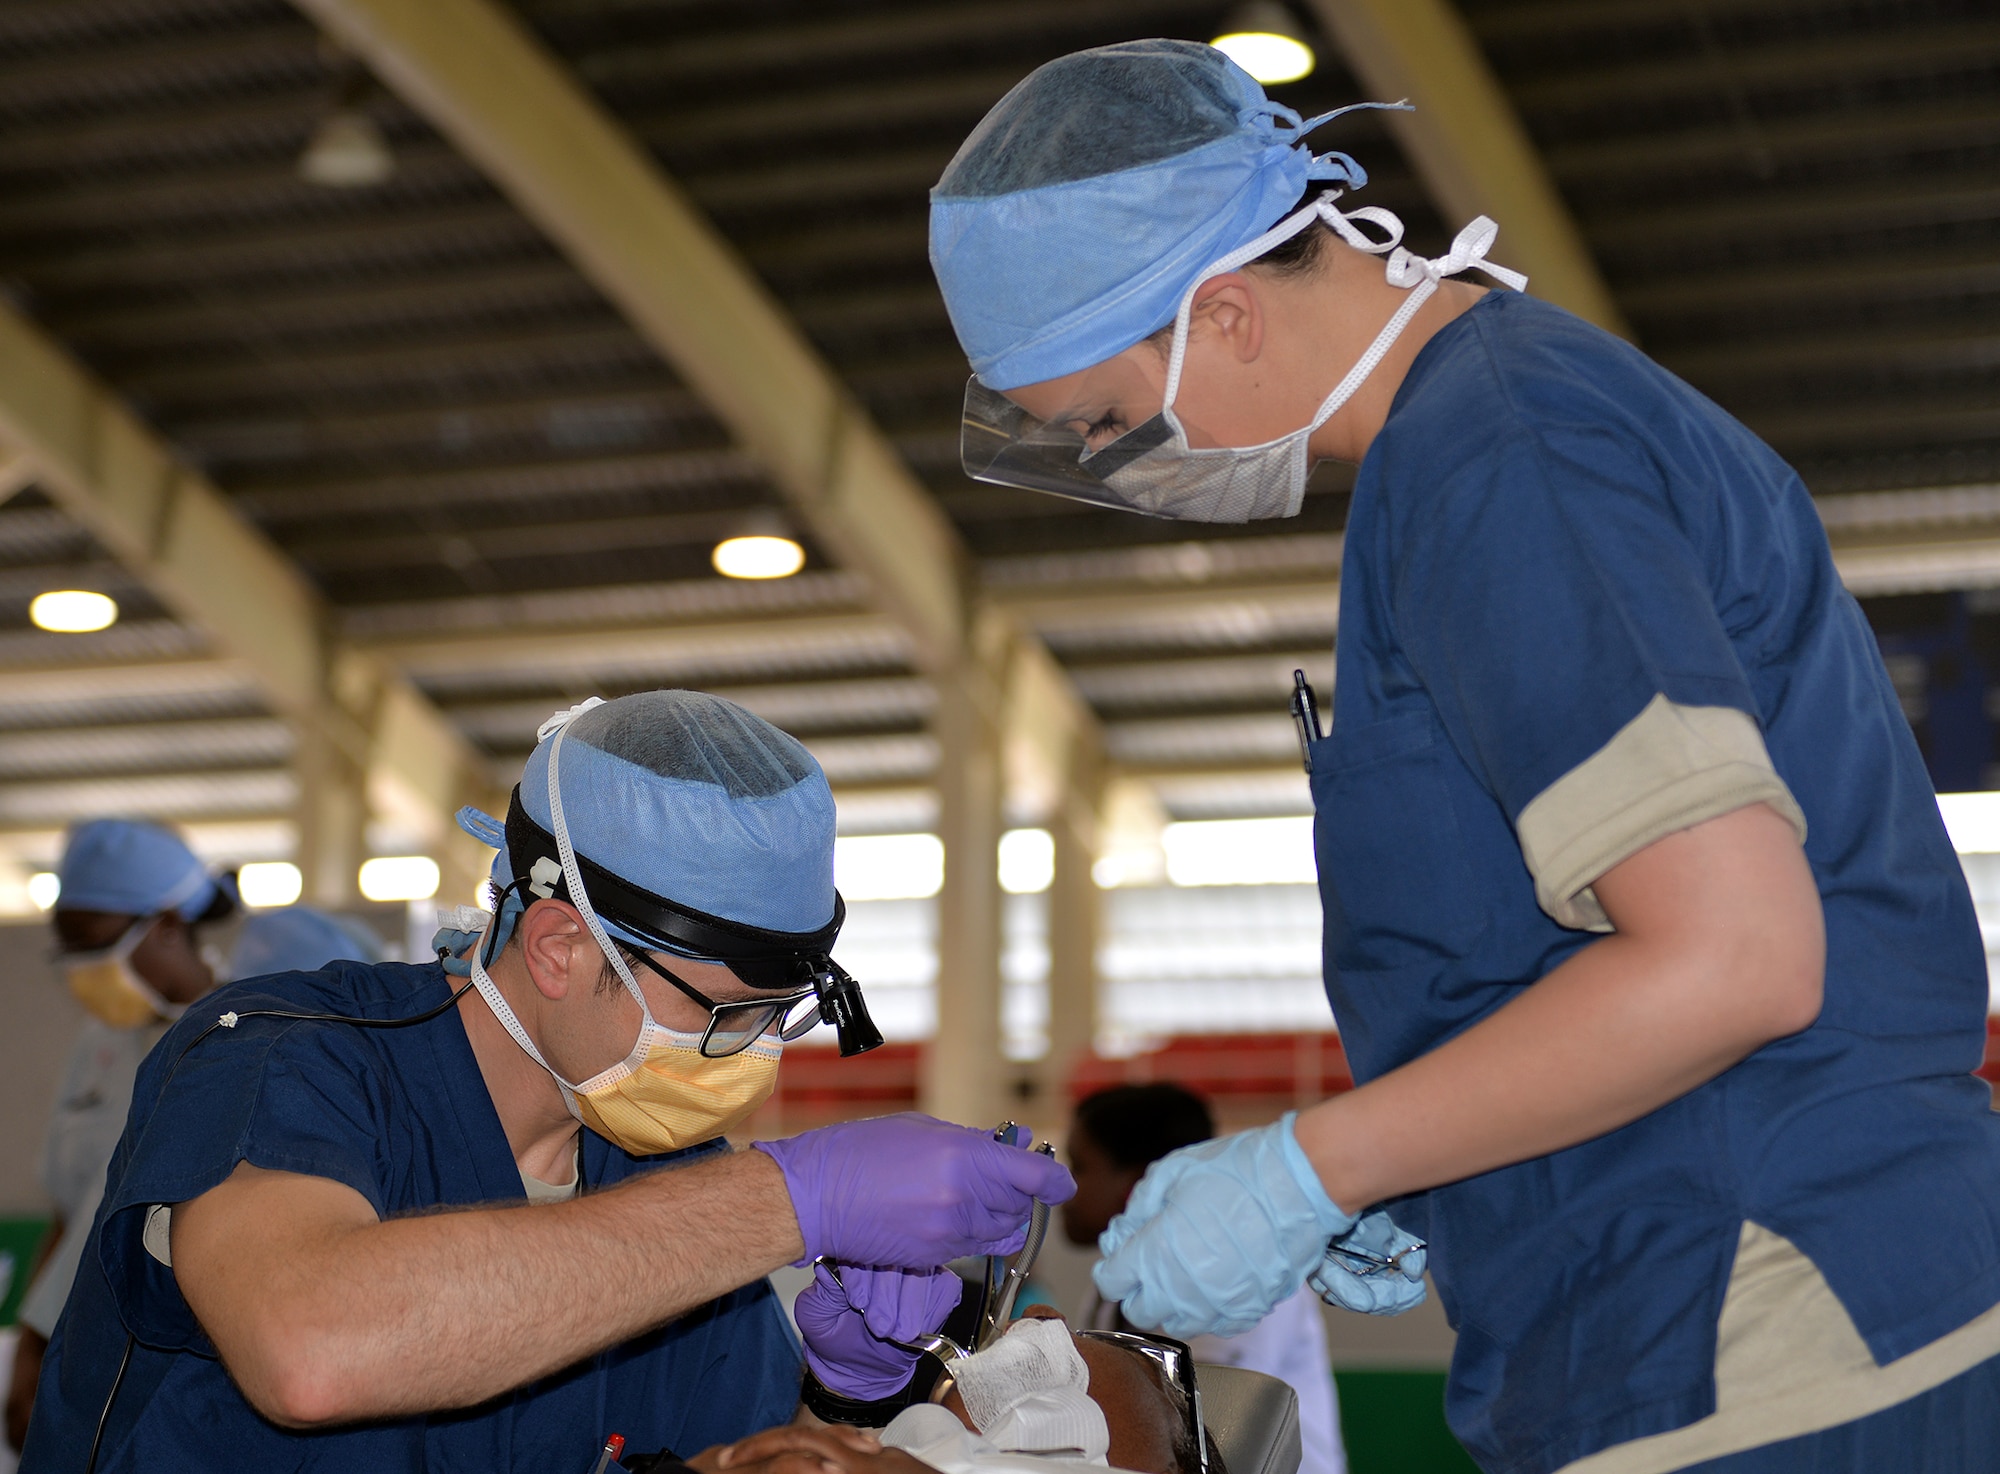 U.S. Air Force Capt. Caleb English, an oral and maxillofacial surgeon with the 633rd Medical Group out of Joint Base McGuire-Dix-Lakehurst, Va., performs oral surgery with the assistance of Senior Airman Caitlin Moore, a dental assistant with the 81st Dental Squadron out of Keesler Air Force Base, Miss., March 14, 2017, during a dental readiness training exercise in Azua, Dominican Republic, as part of NEW HORIZONS 2017. The training provided by NEW HORIZONS missions promotes bilateral cooperation between U.S. and partner nation military engineers, medical personnel and support staff, and ensures U.S. forces remain prepared for real-world deployments in support of contingency, humanitarian assistance, and disaster relief operations. (U.S. Air Force photo by Master Sgt. Karen J. Tomasik)